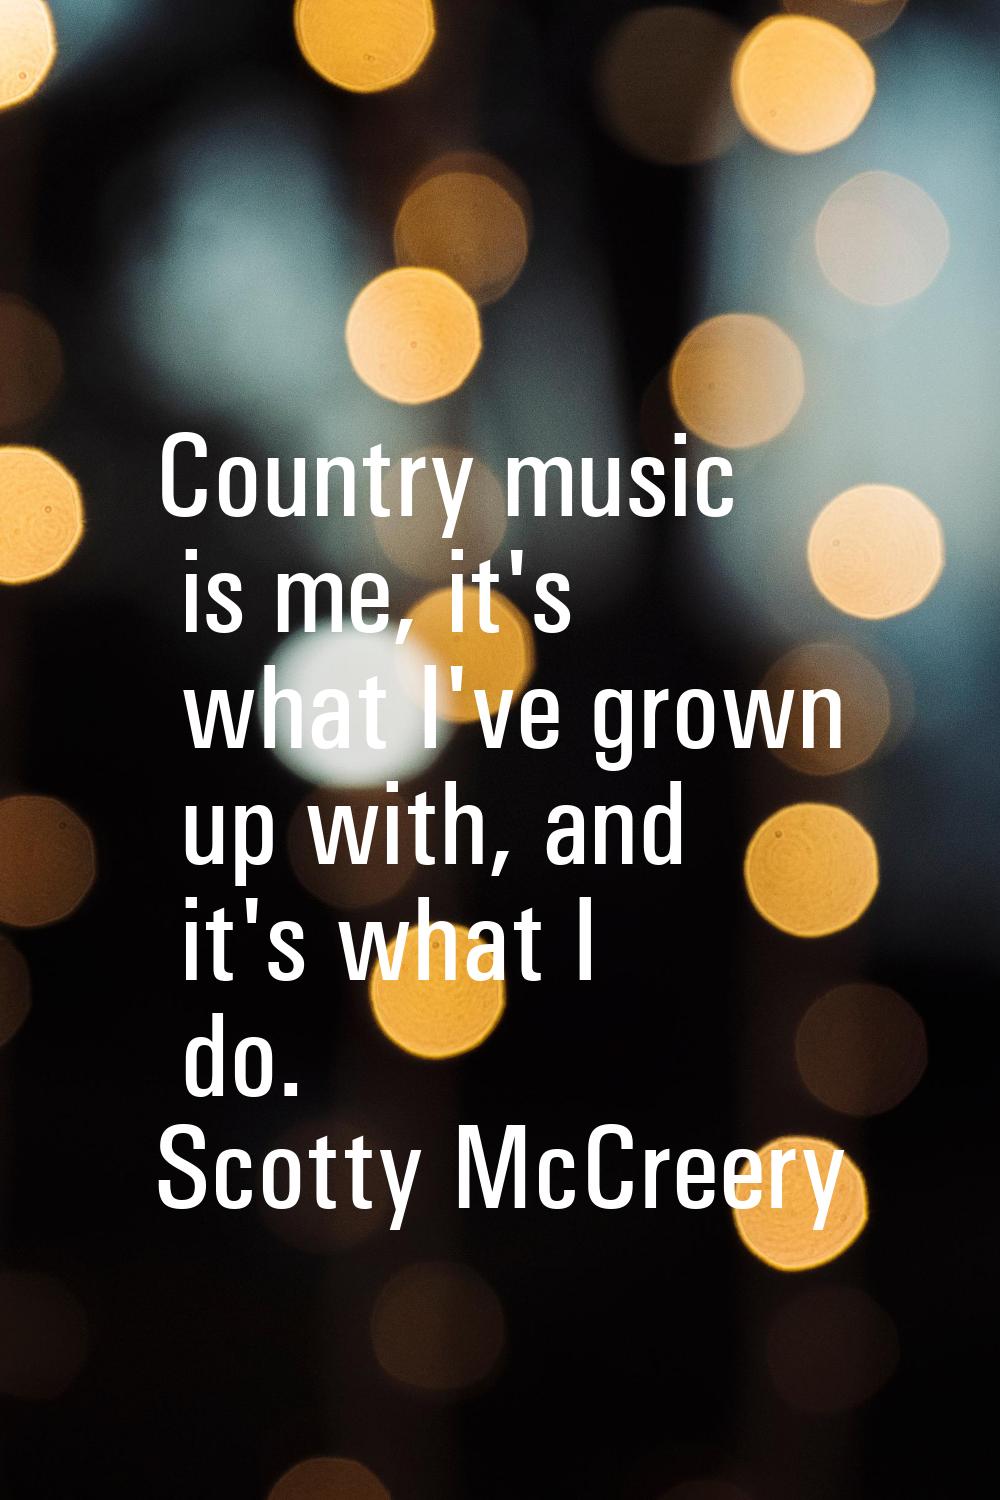 Country music is me, it's what I've grown up with, and it's what I do.